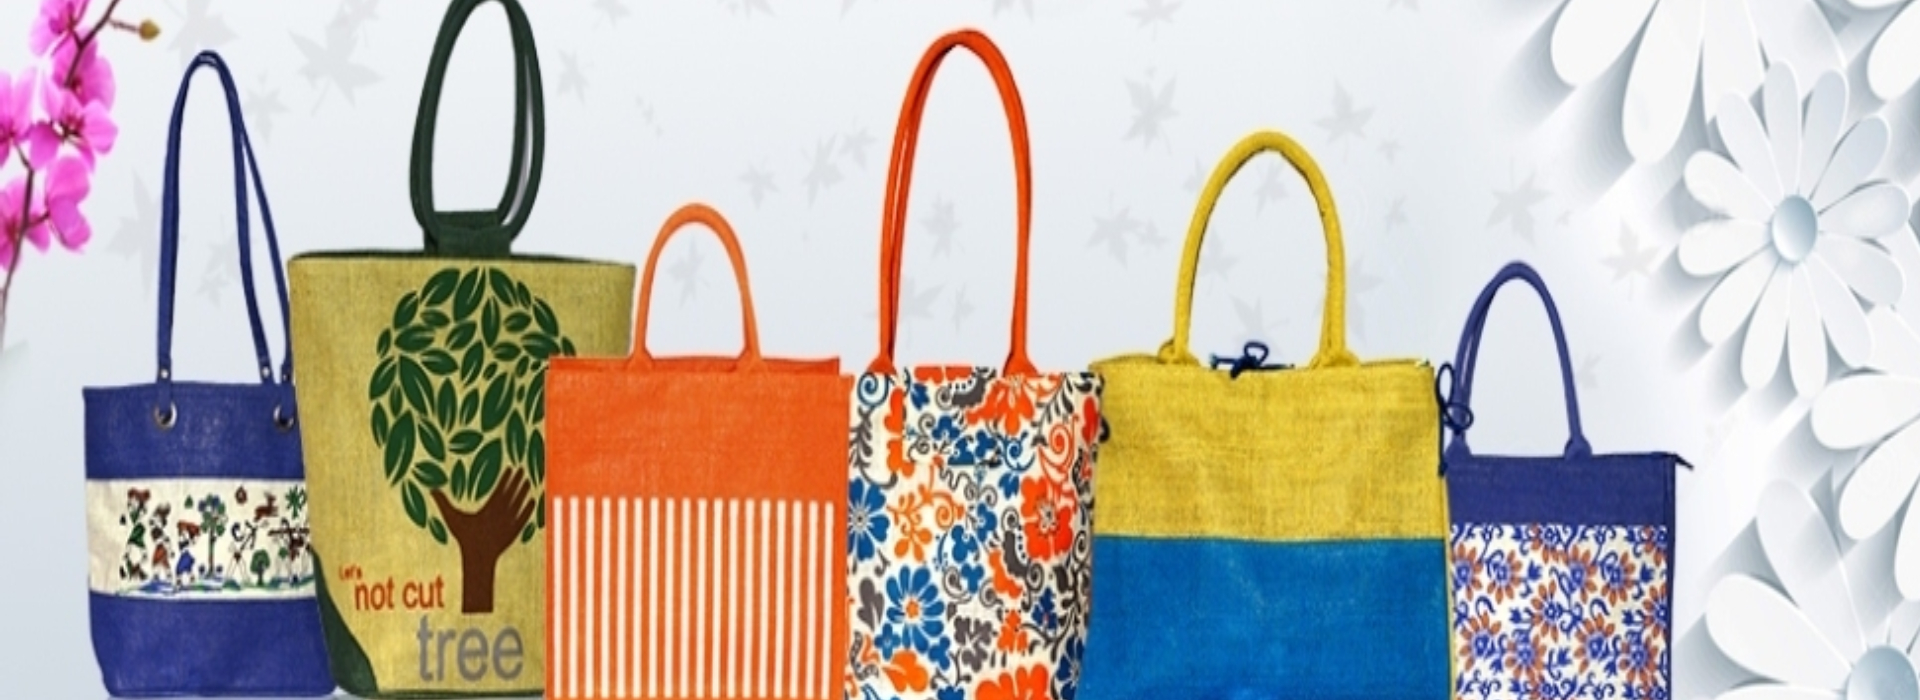 Jute World Wide - Trusted cotton jute shopping bags & braided bags supplier